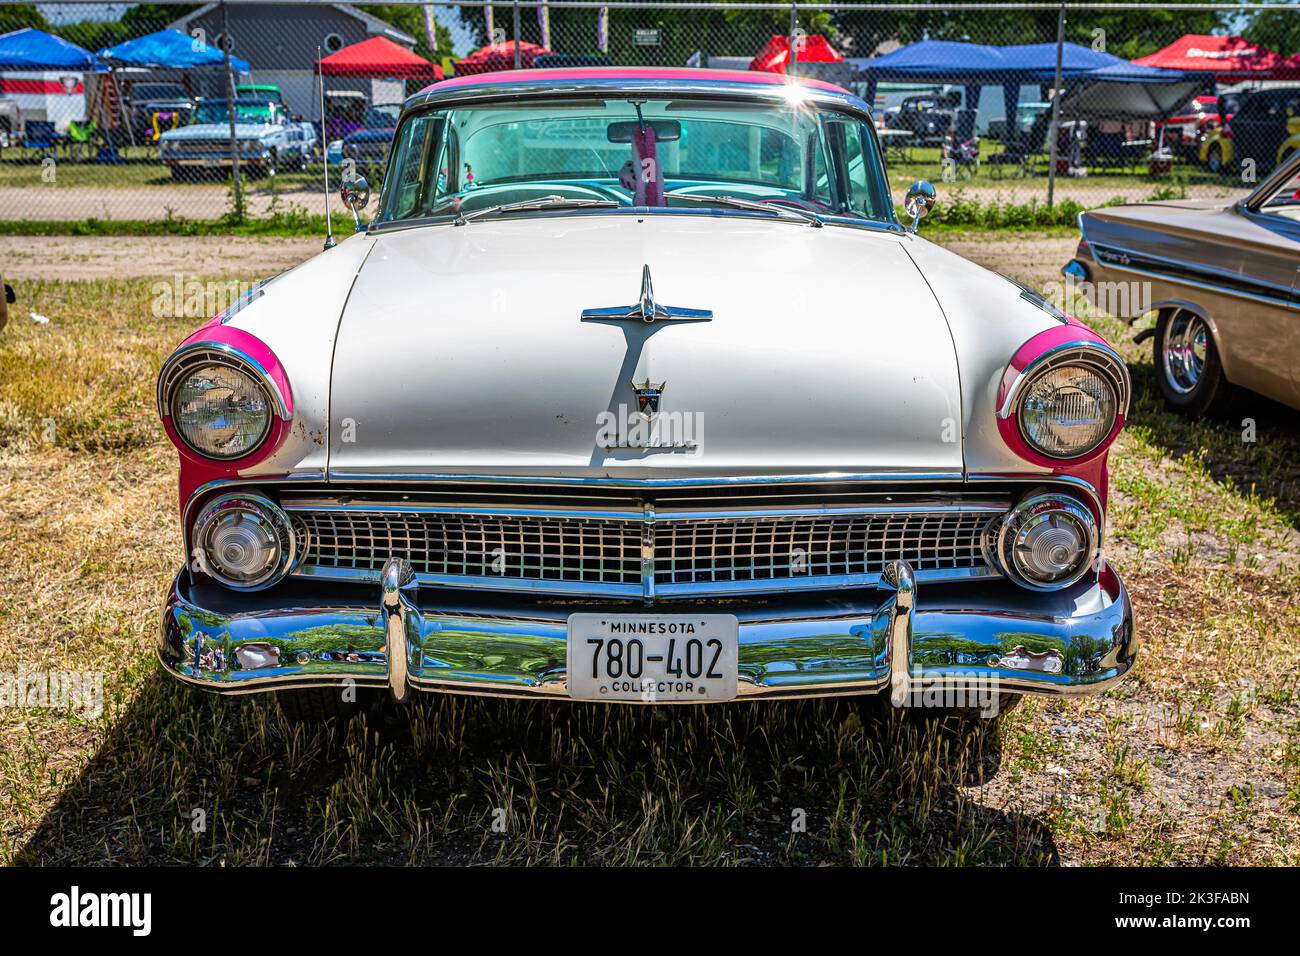 Falcon Heights, MN - June 18, 2022: High perspective front view of a 1955 Ford Fairlane Crown Victoria 2 Door Hardtop at a local car show. Stock Photo